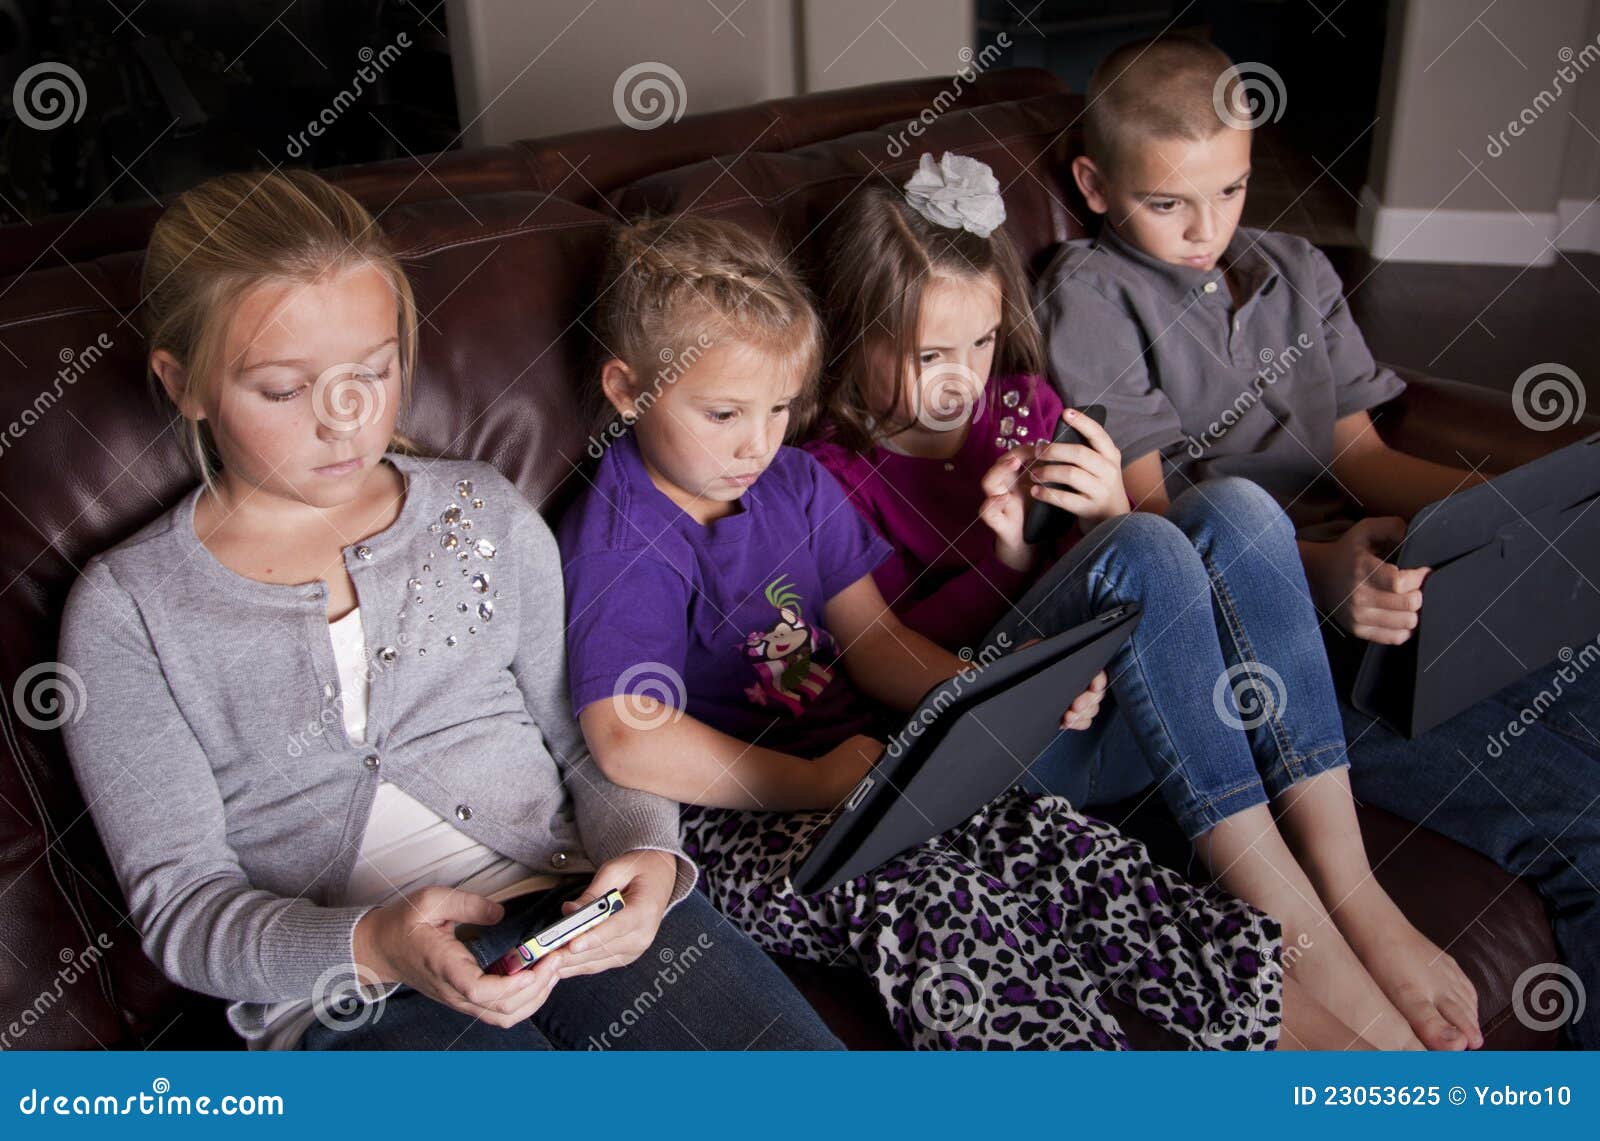 kids using mobile devices